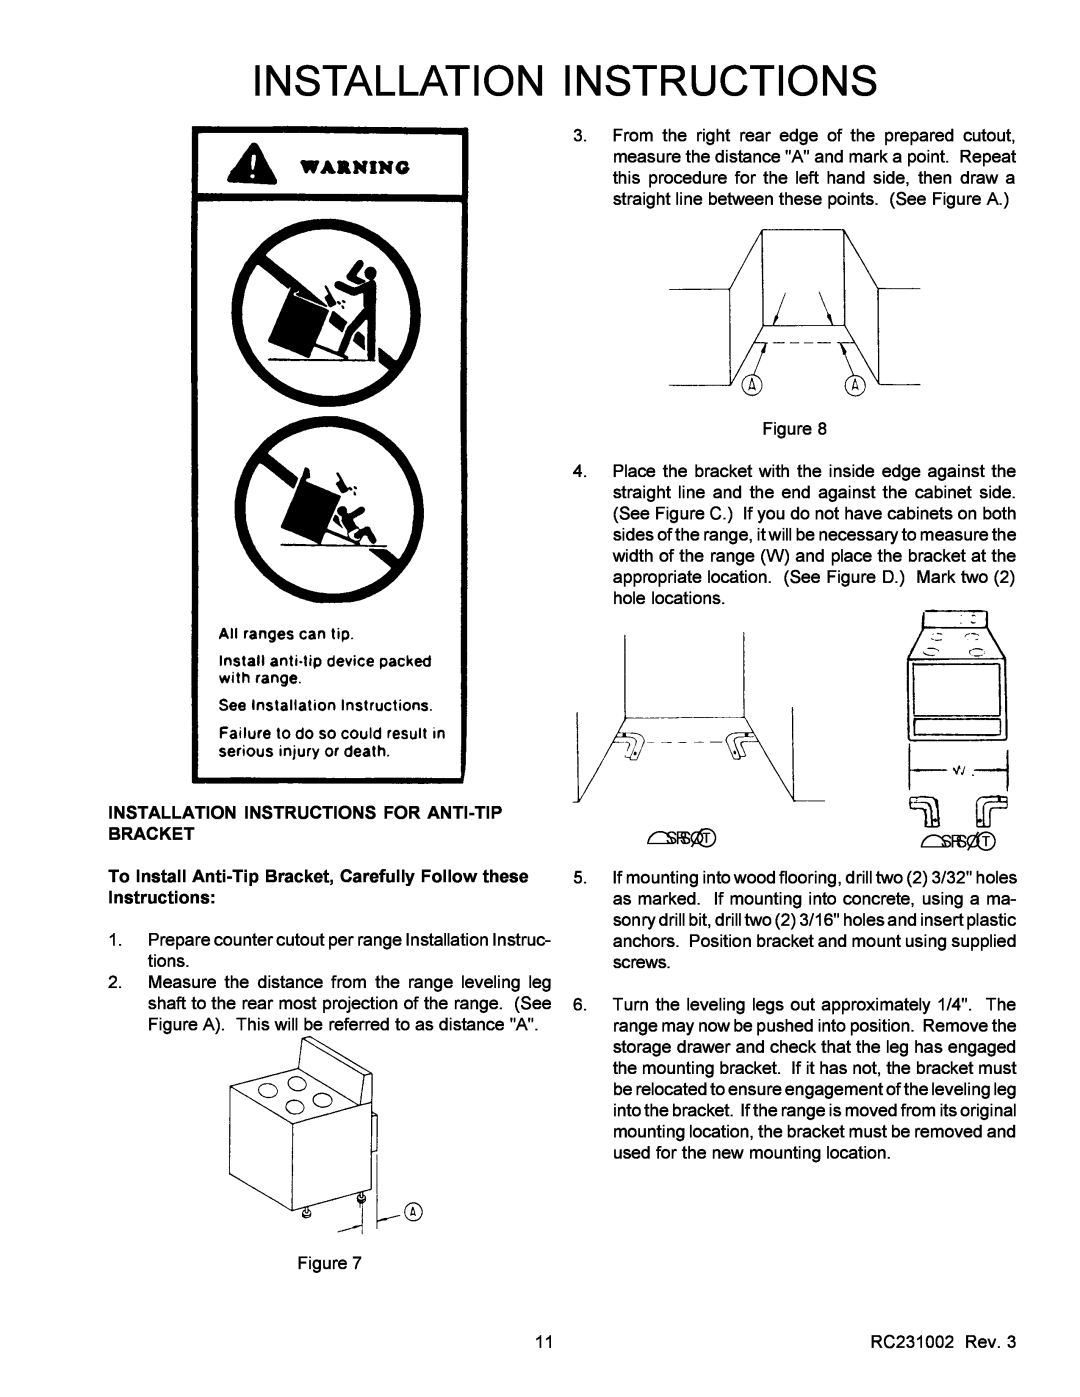 Amana RSS, RST service manual Installation Instructions For Anti-Tip, Bracket 